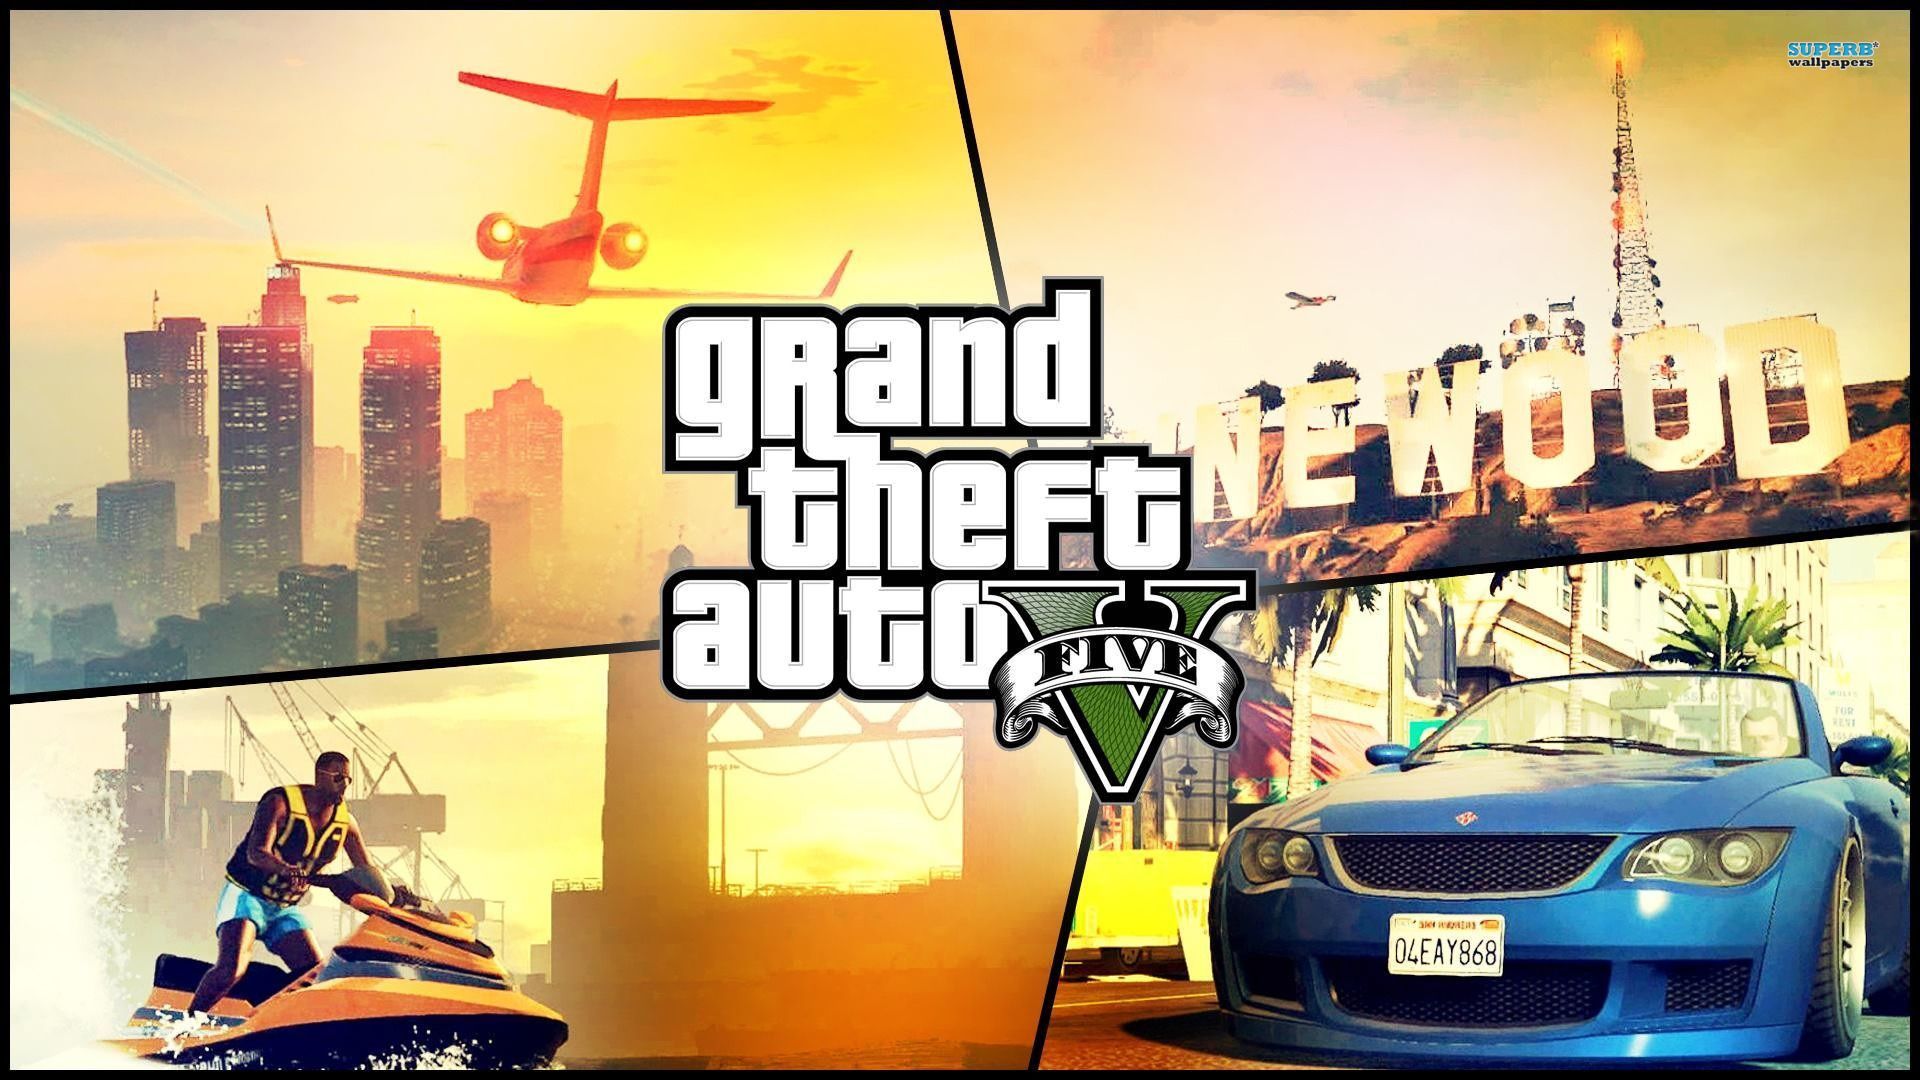 Grand Theft Auto V wallpaper - Game wallpapers - #15718